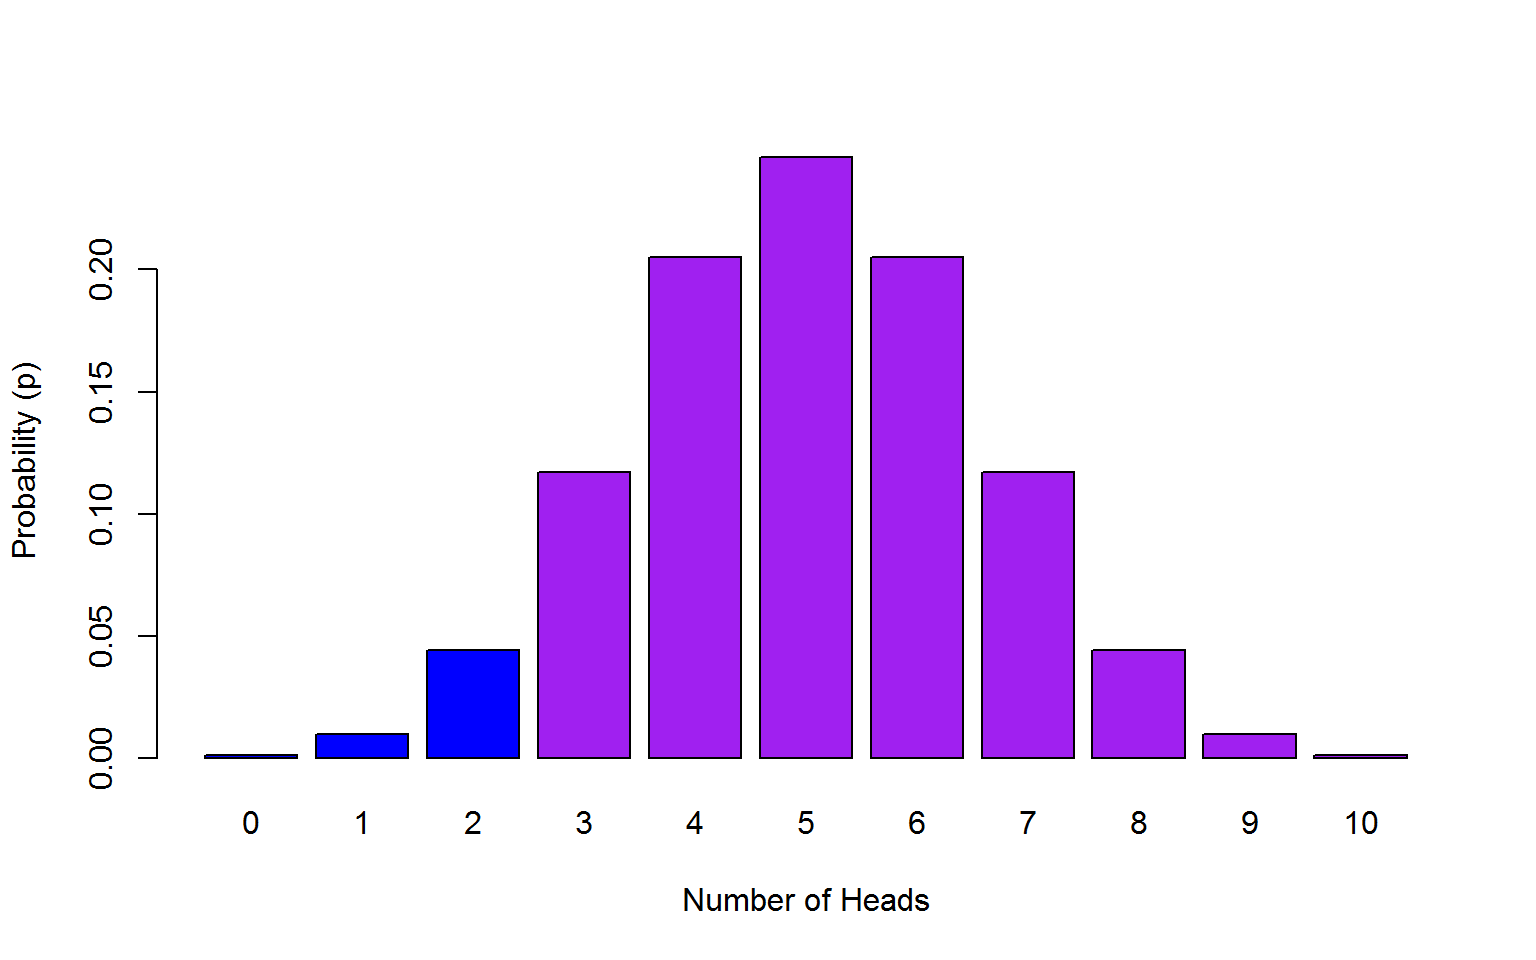 Max of 2 heads from 10 coin toss probability outcomes.